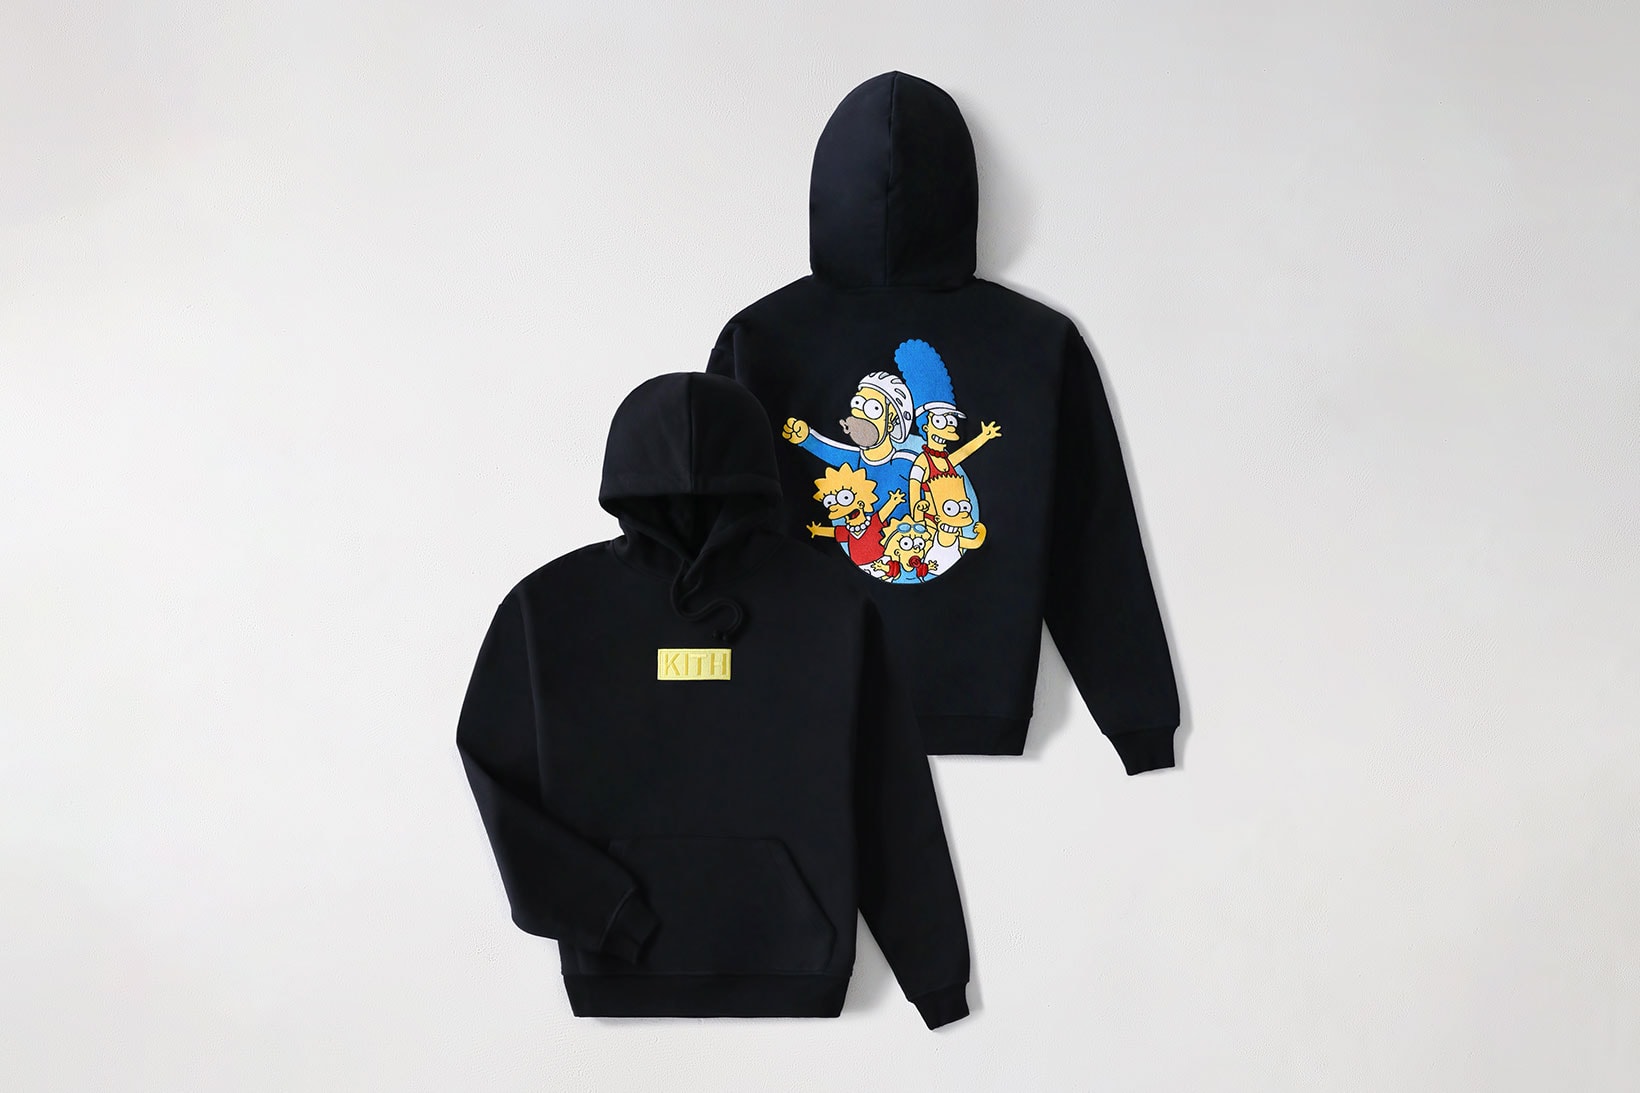 the simpsons kith collaboration graphic hoodie black marge bart lisa maggie homer